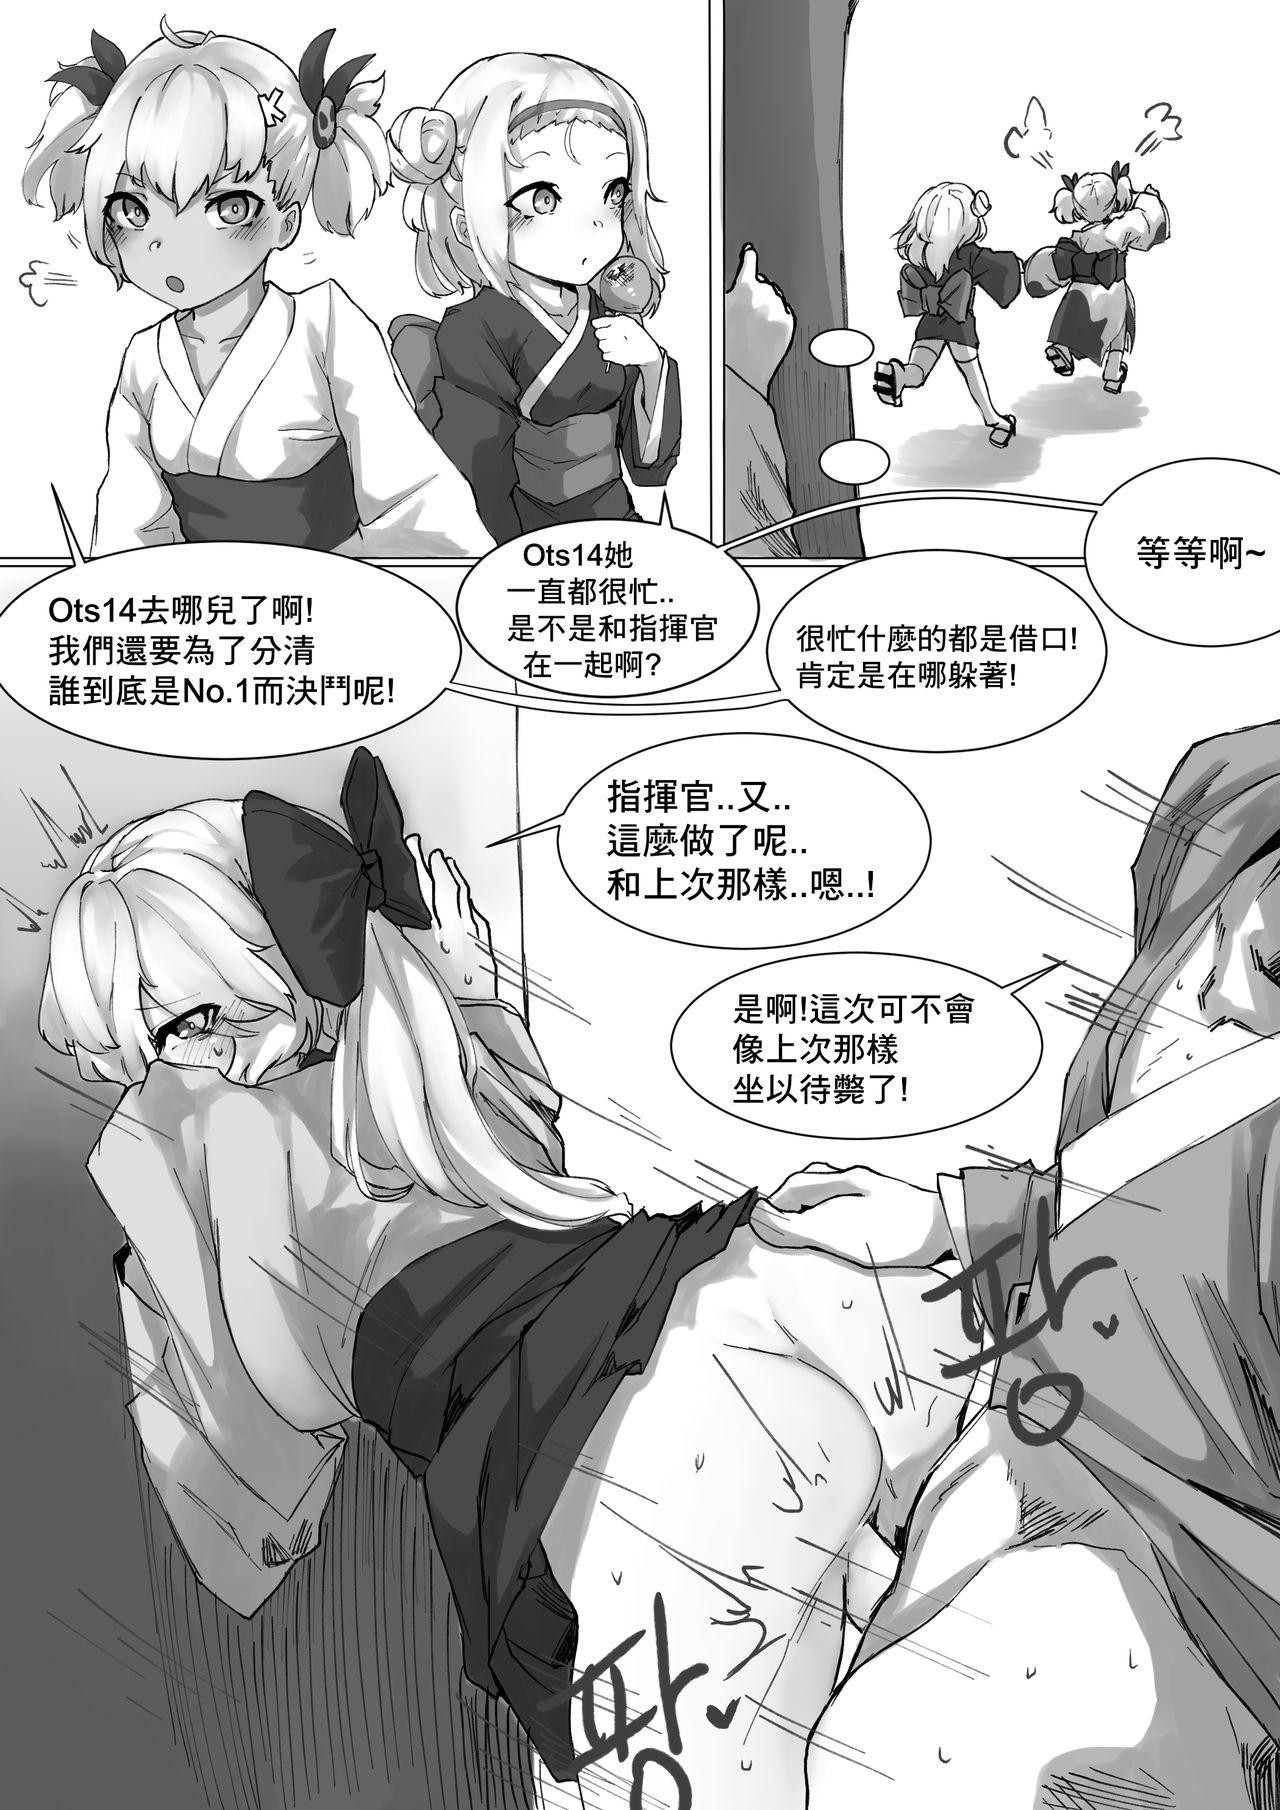 Nena How To Use OTS-14 - Girls frontline Milk - Page 10